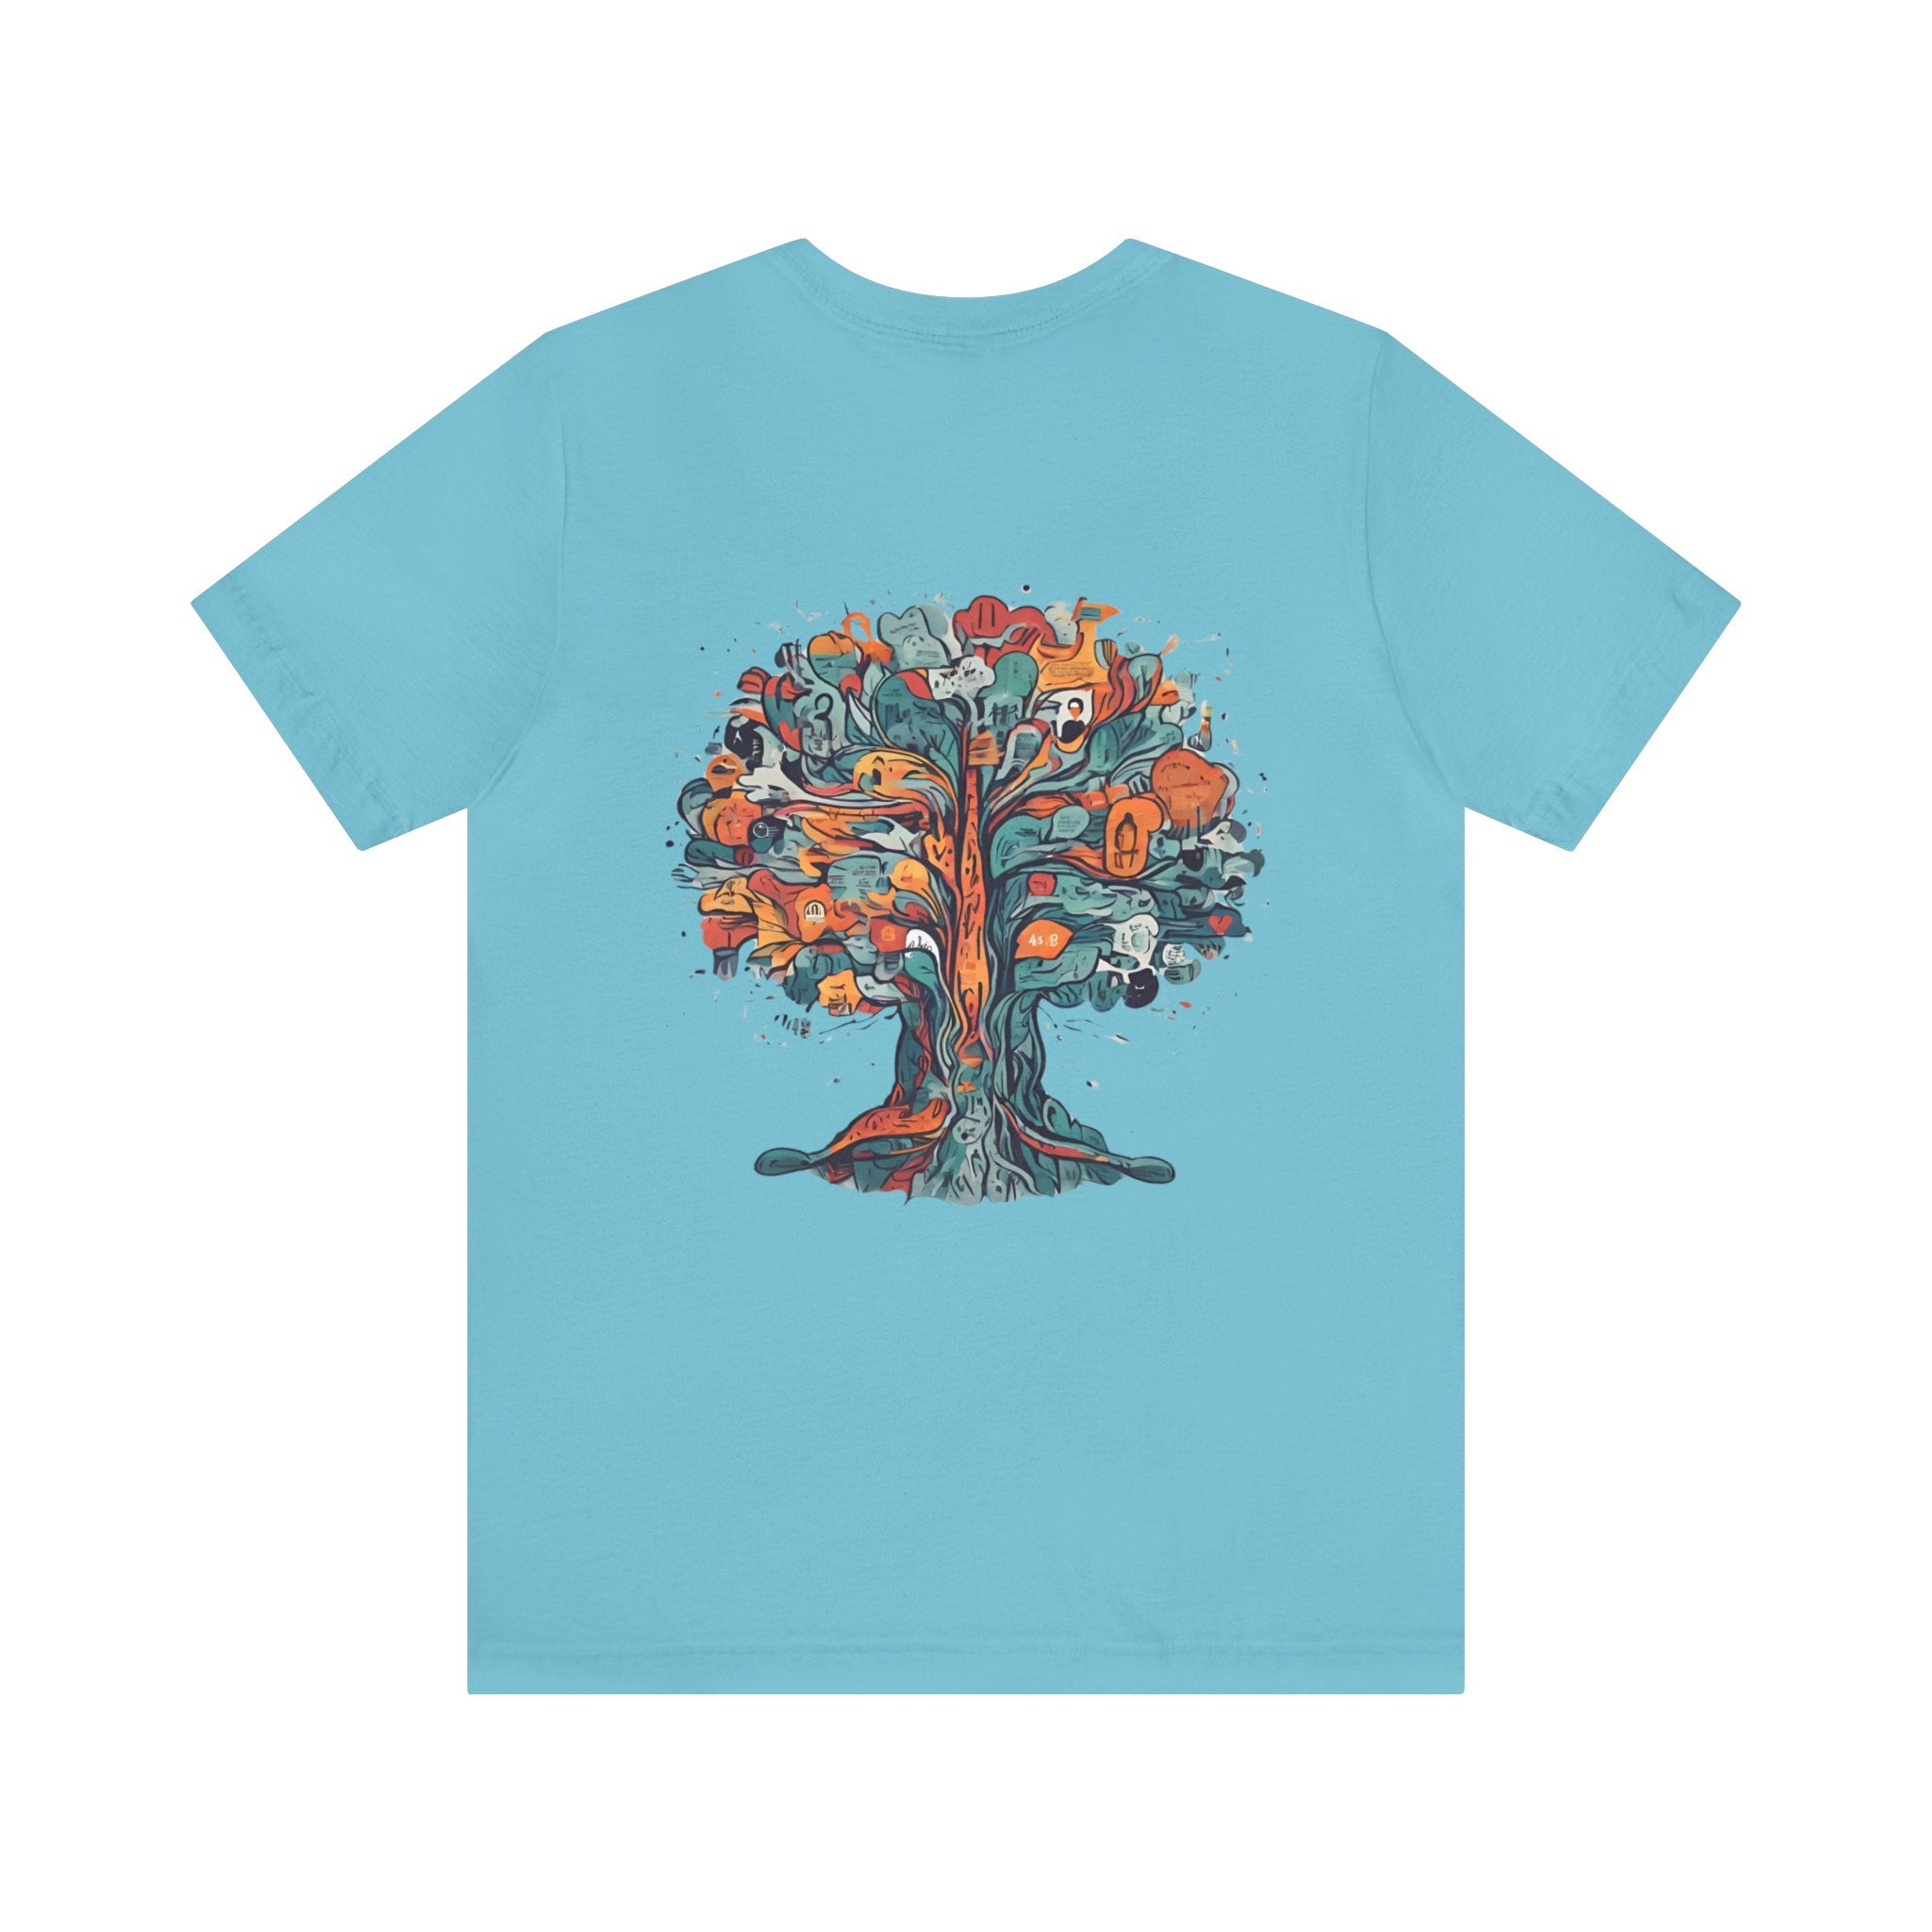 Inspire Growth Jersey Tee - Bella+Canvas 3001 Turquoise Airlume Cotton Bella+Canvas 3001 Crew Neckline Jersey Short Sleeve Lightweight Fabric Mental Health Support Retail Fit Tear-away Label Tee Unisex Tee T-Shirt 9374070886283861034_2048 Printify